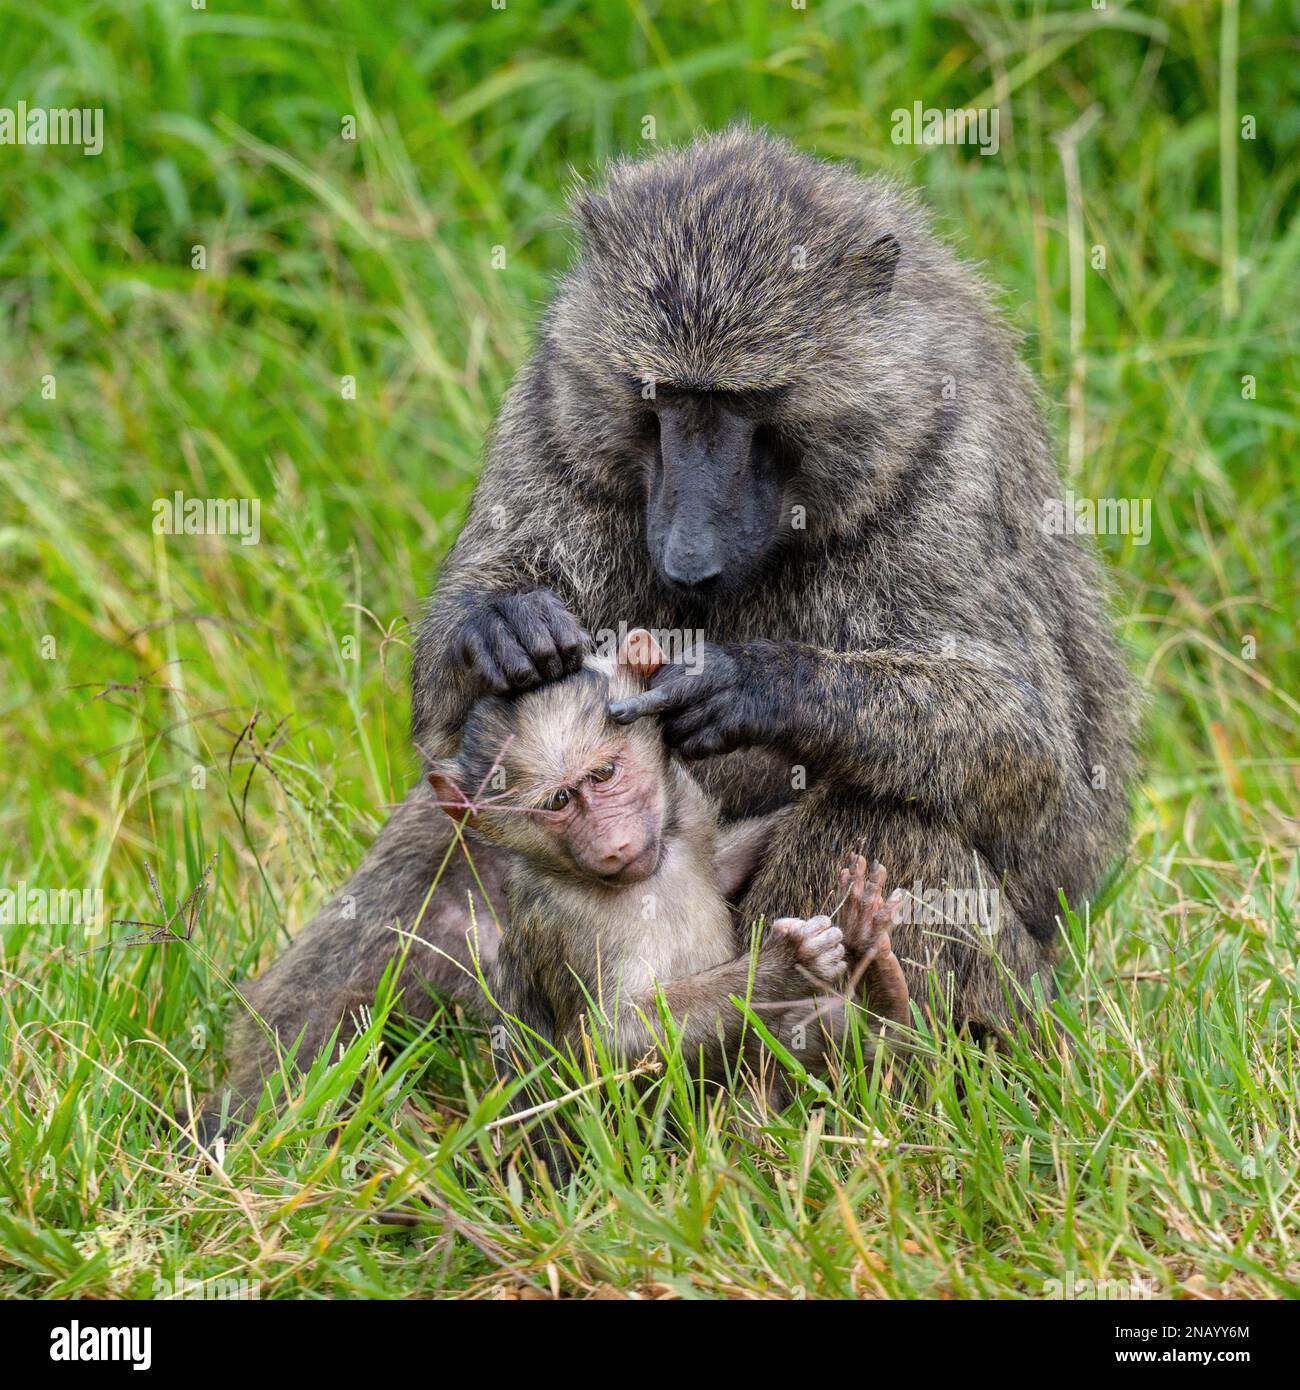 A baboon mother attentively grooms a youngster in the grass somewhere in Uganda.  The hands and fingers are easy to see in the image. Stock Photo